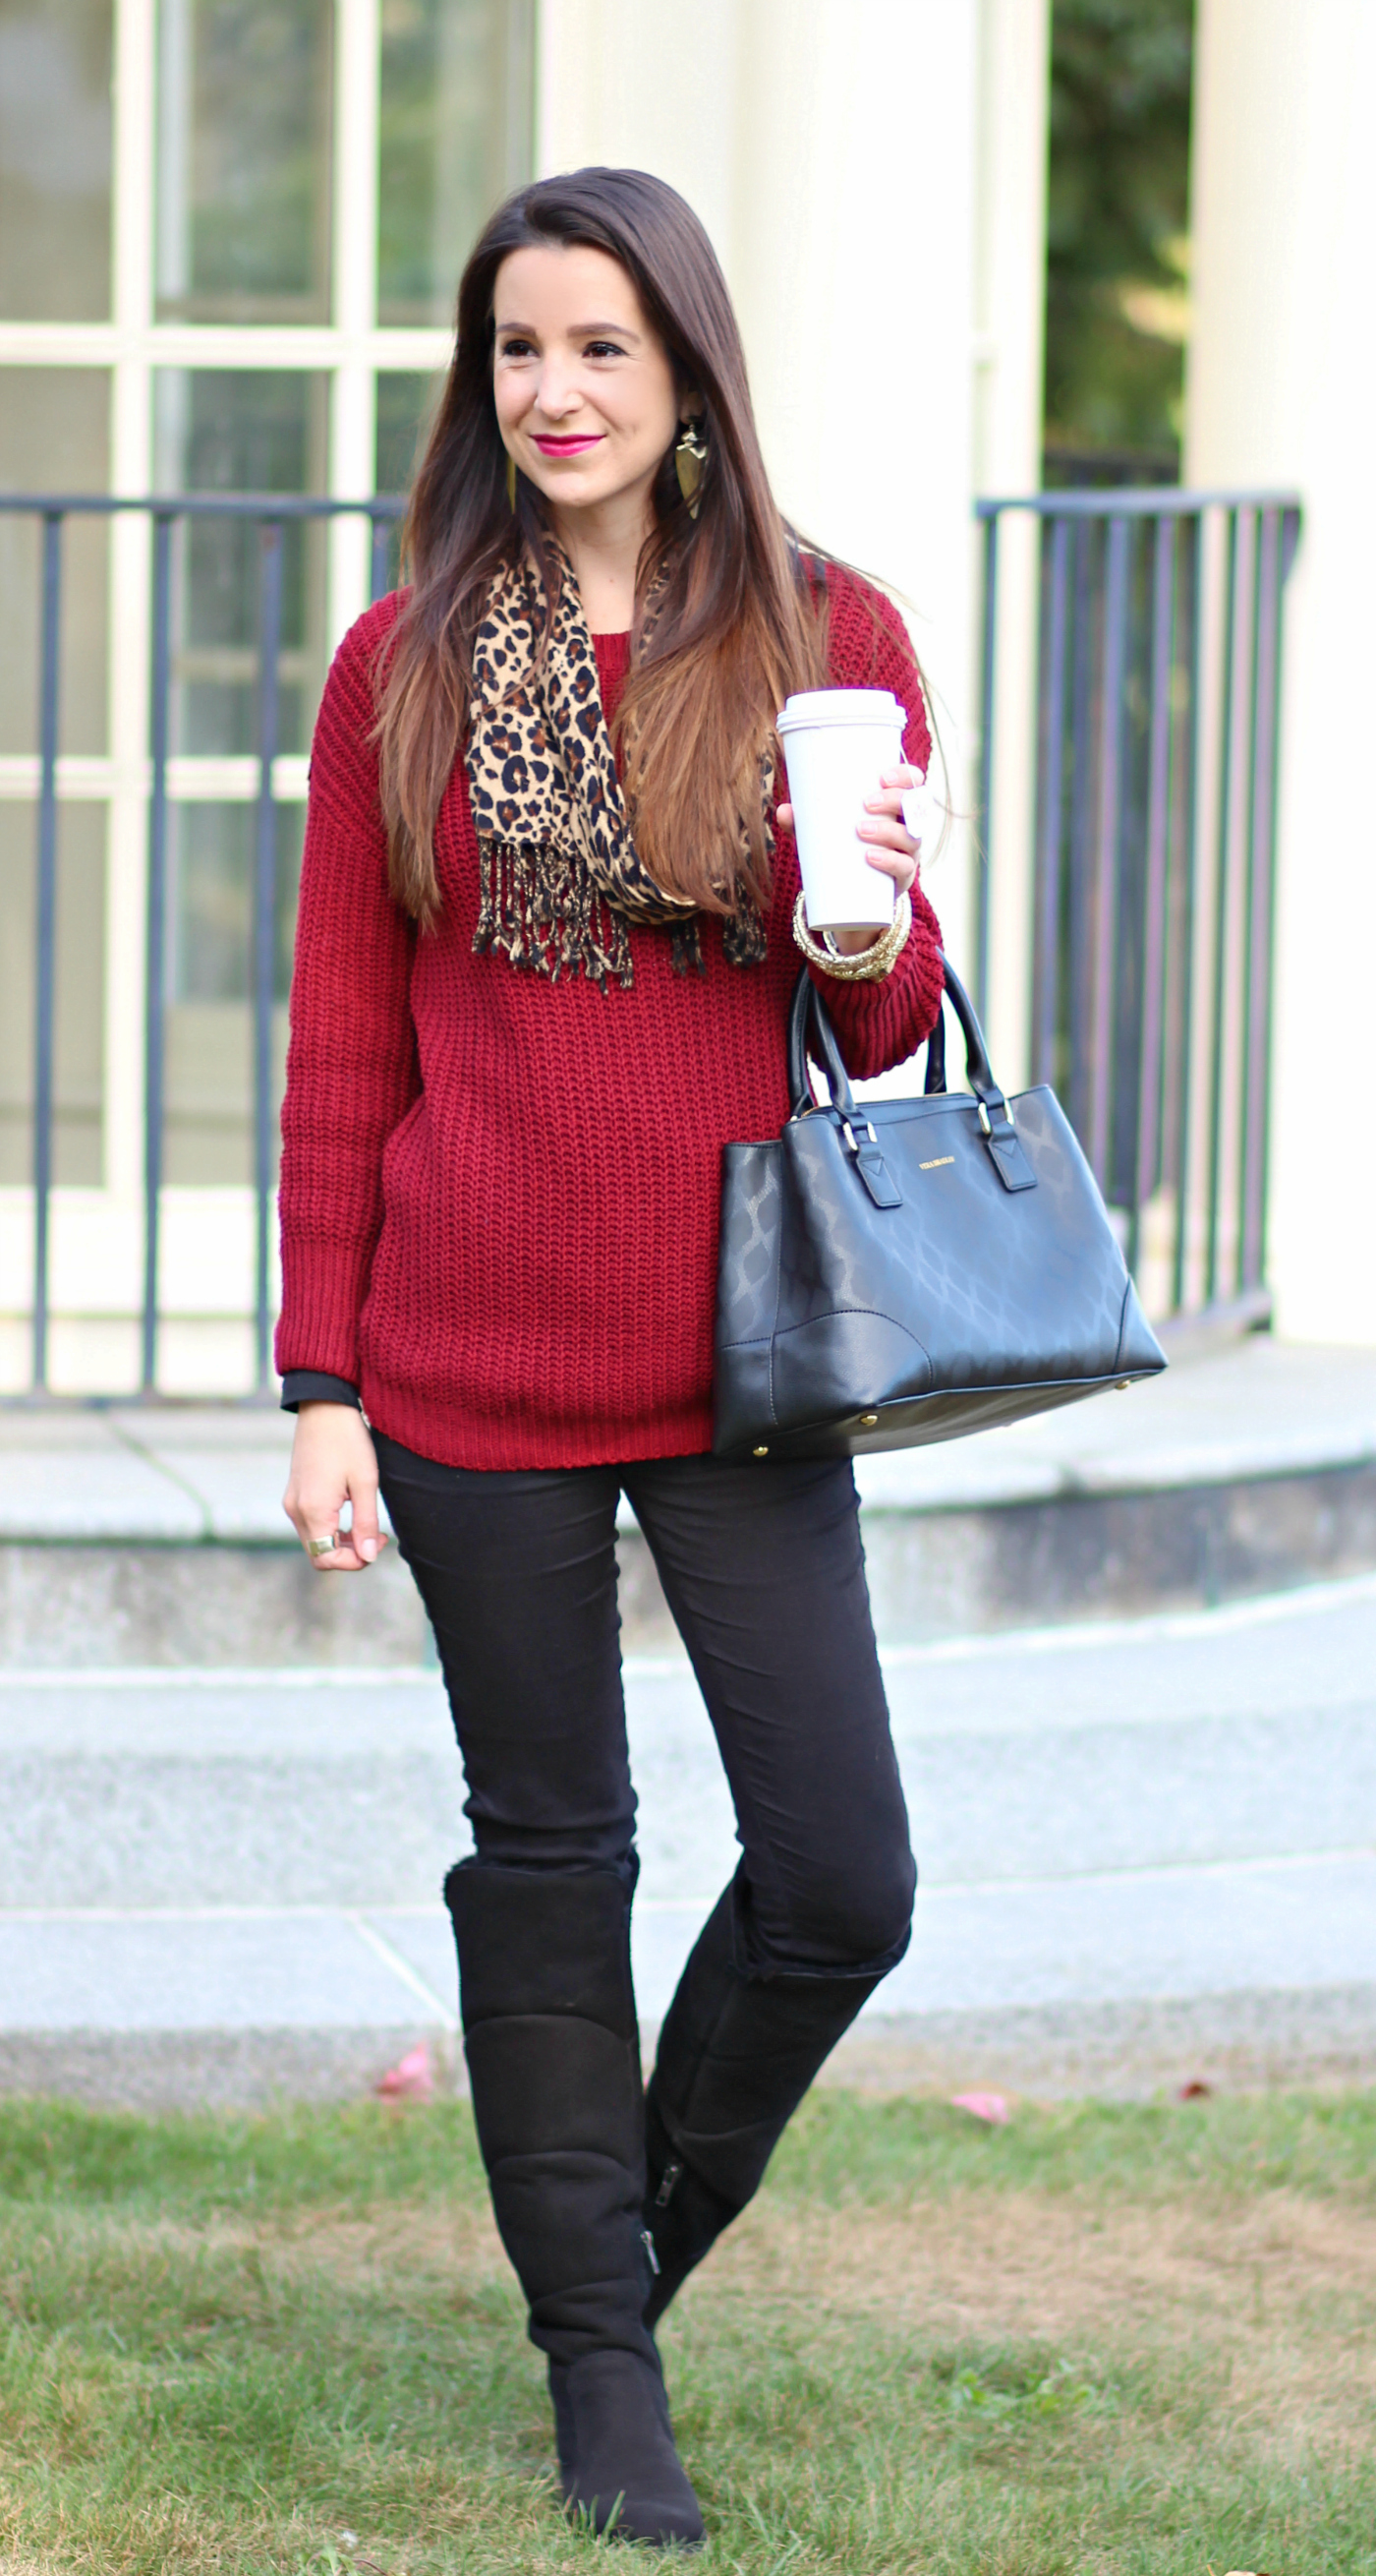 SheIn marsala sweater with a leopard scarf and Sibley tall UGG boots